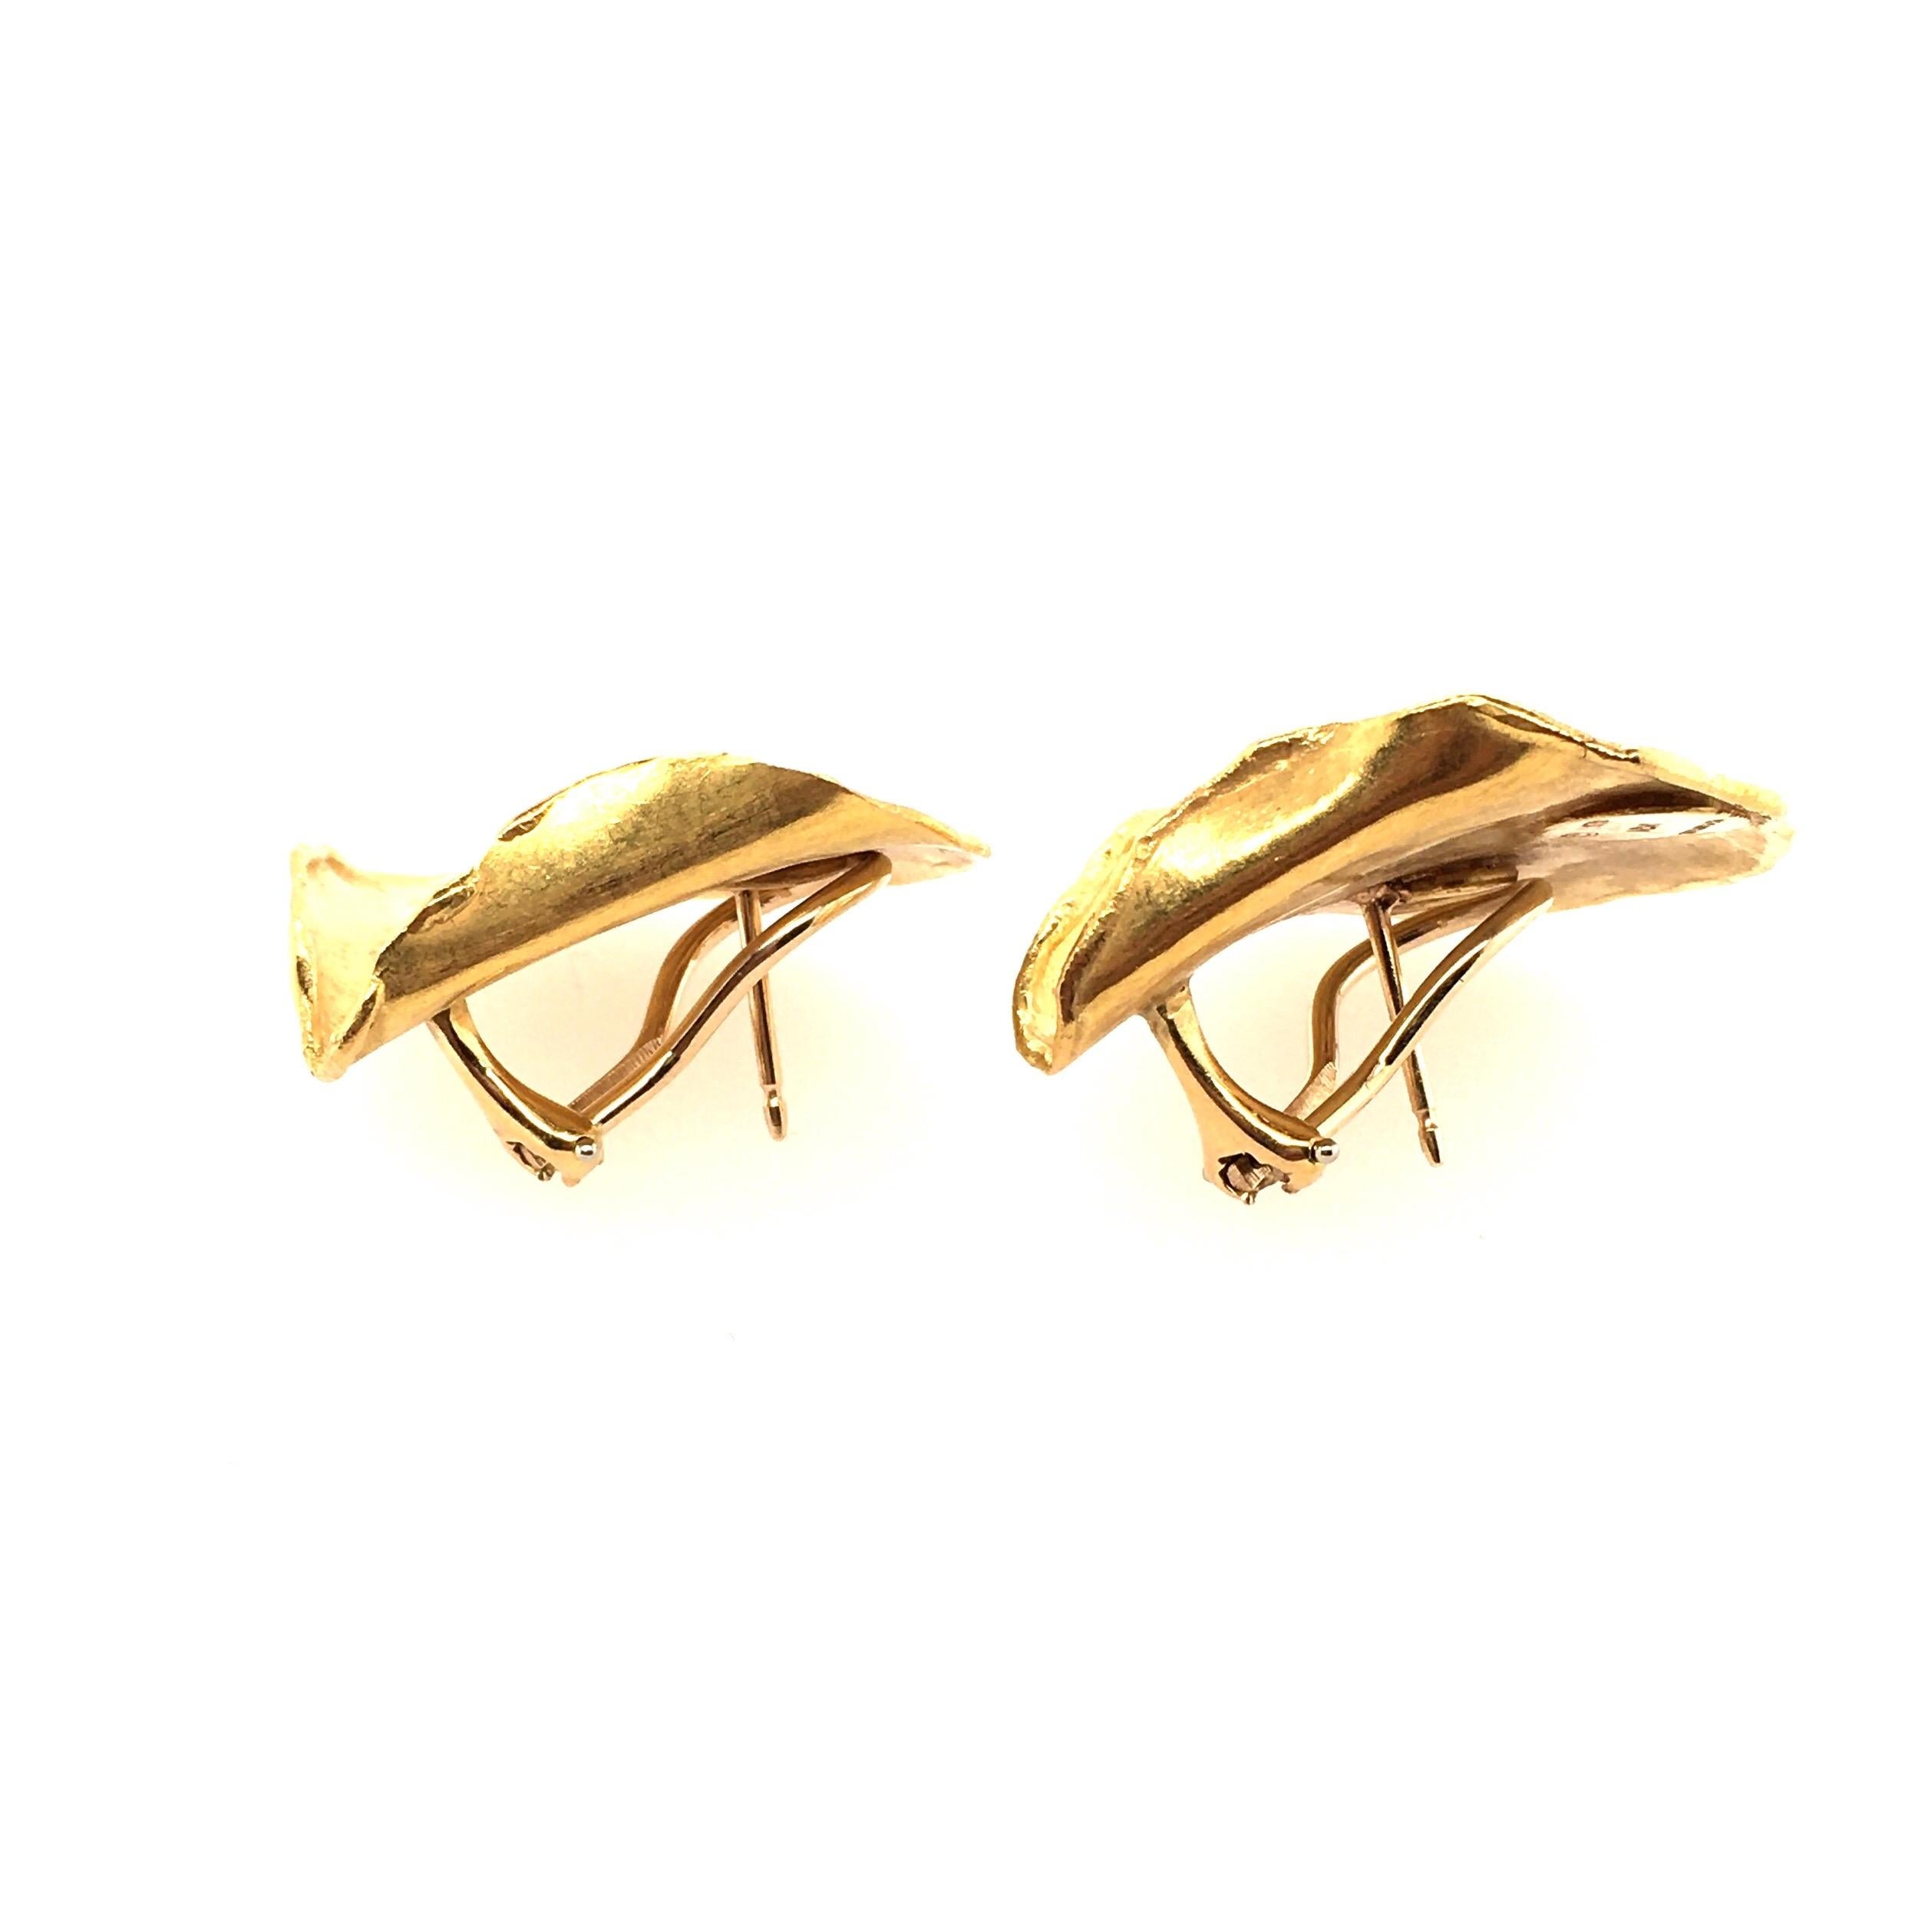 A pair of 18 karat yellow gold rose petal earrings.  Tiffany & Co. 1979. Length is approximately 1 1/4 inches, gross weight is approximately 10.2 grams. Stamped Tiffany & Co, 18k, 1979.